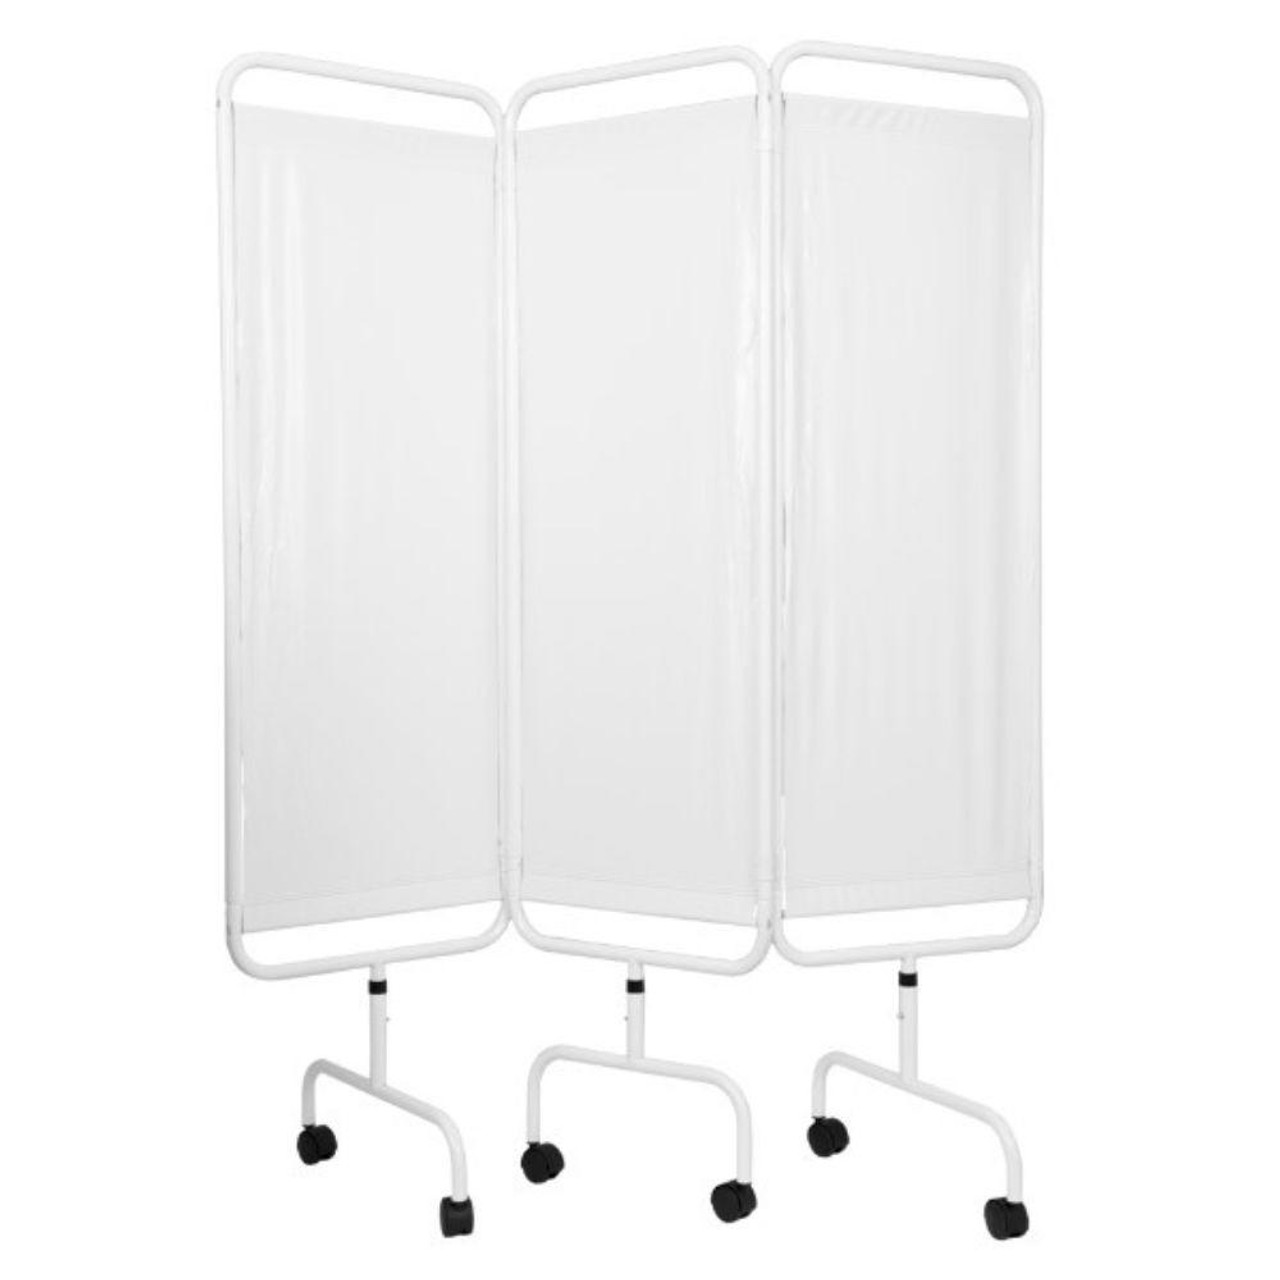  Medical Privacy Screen Three Panel With White Curtains 